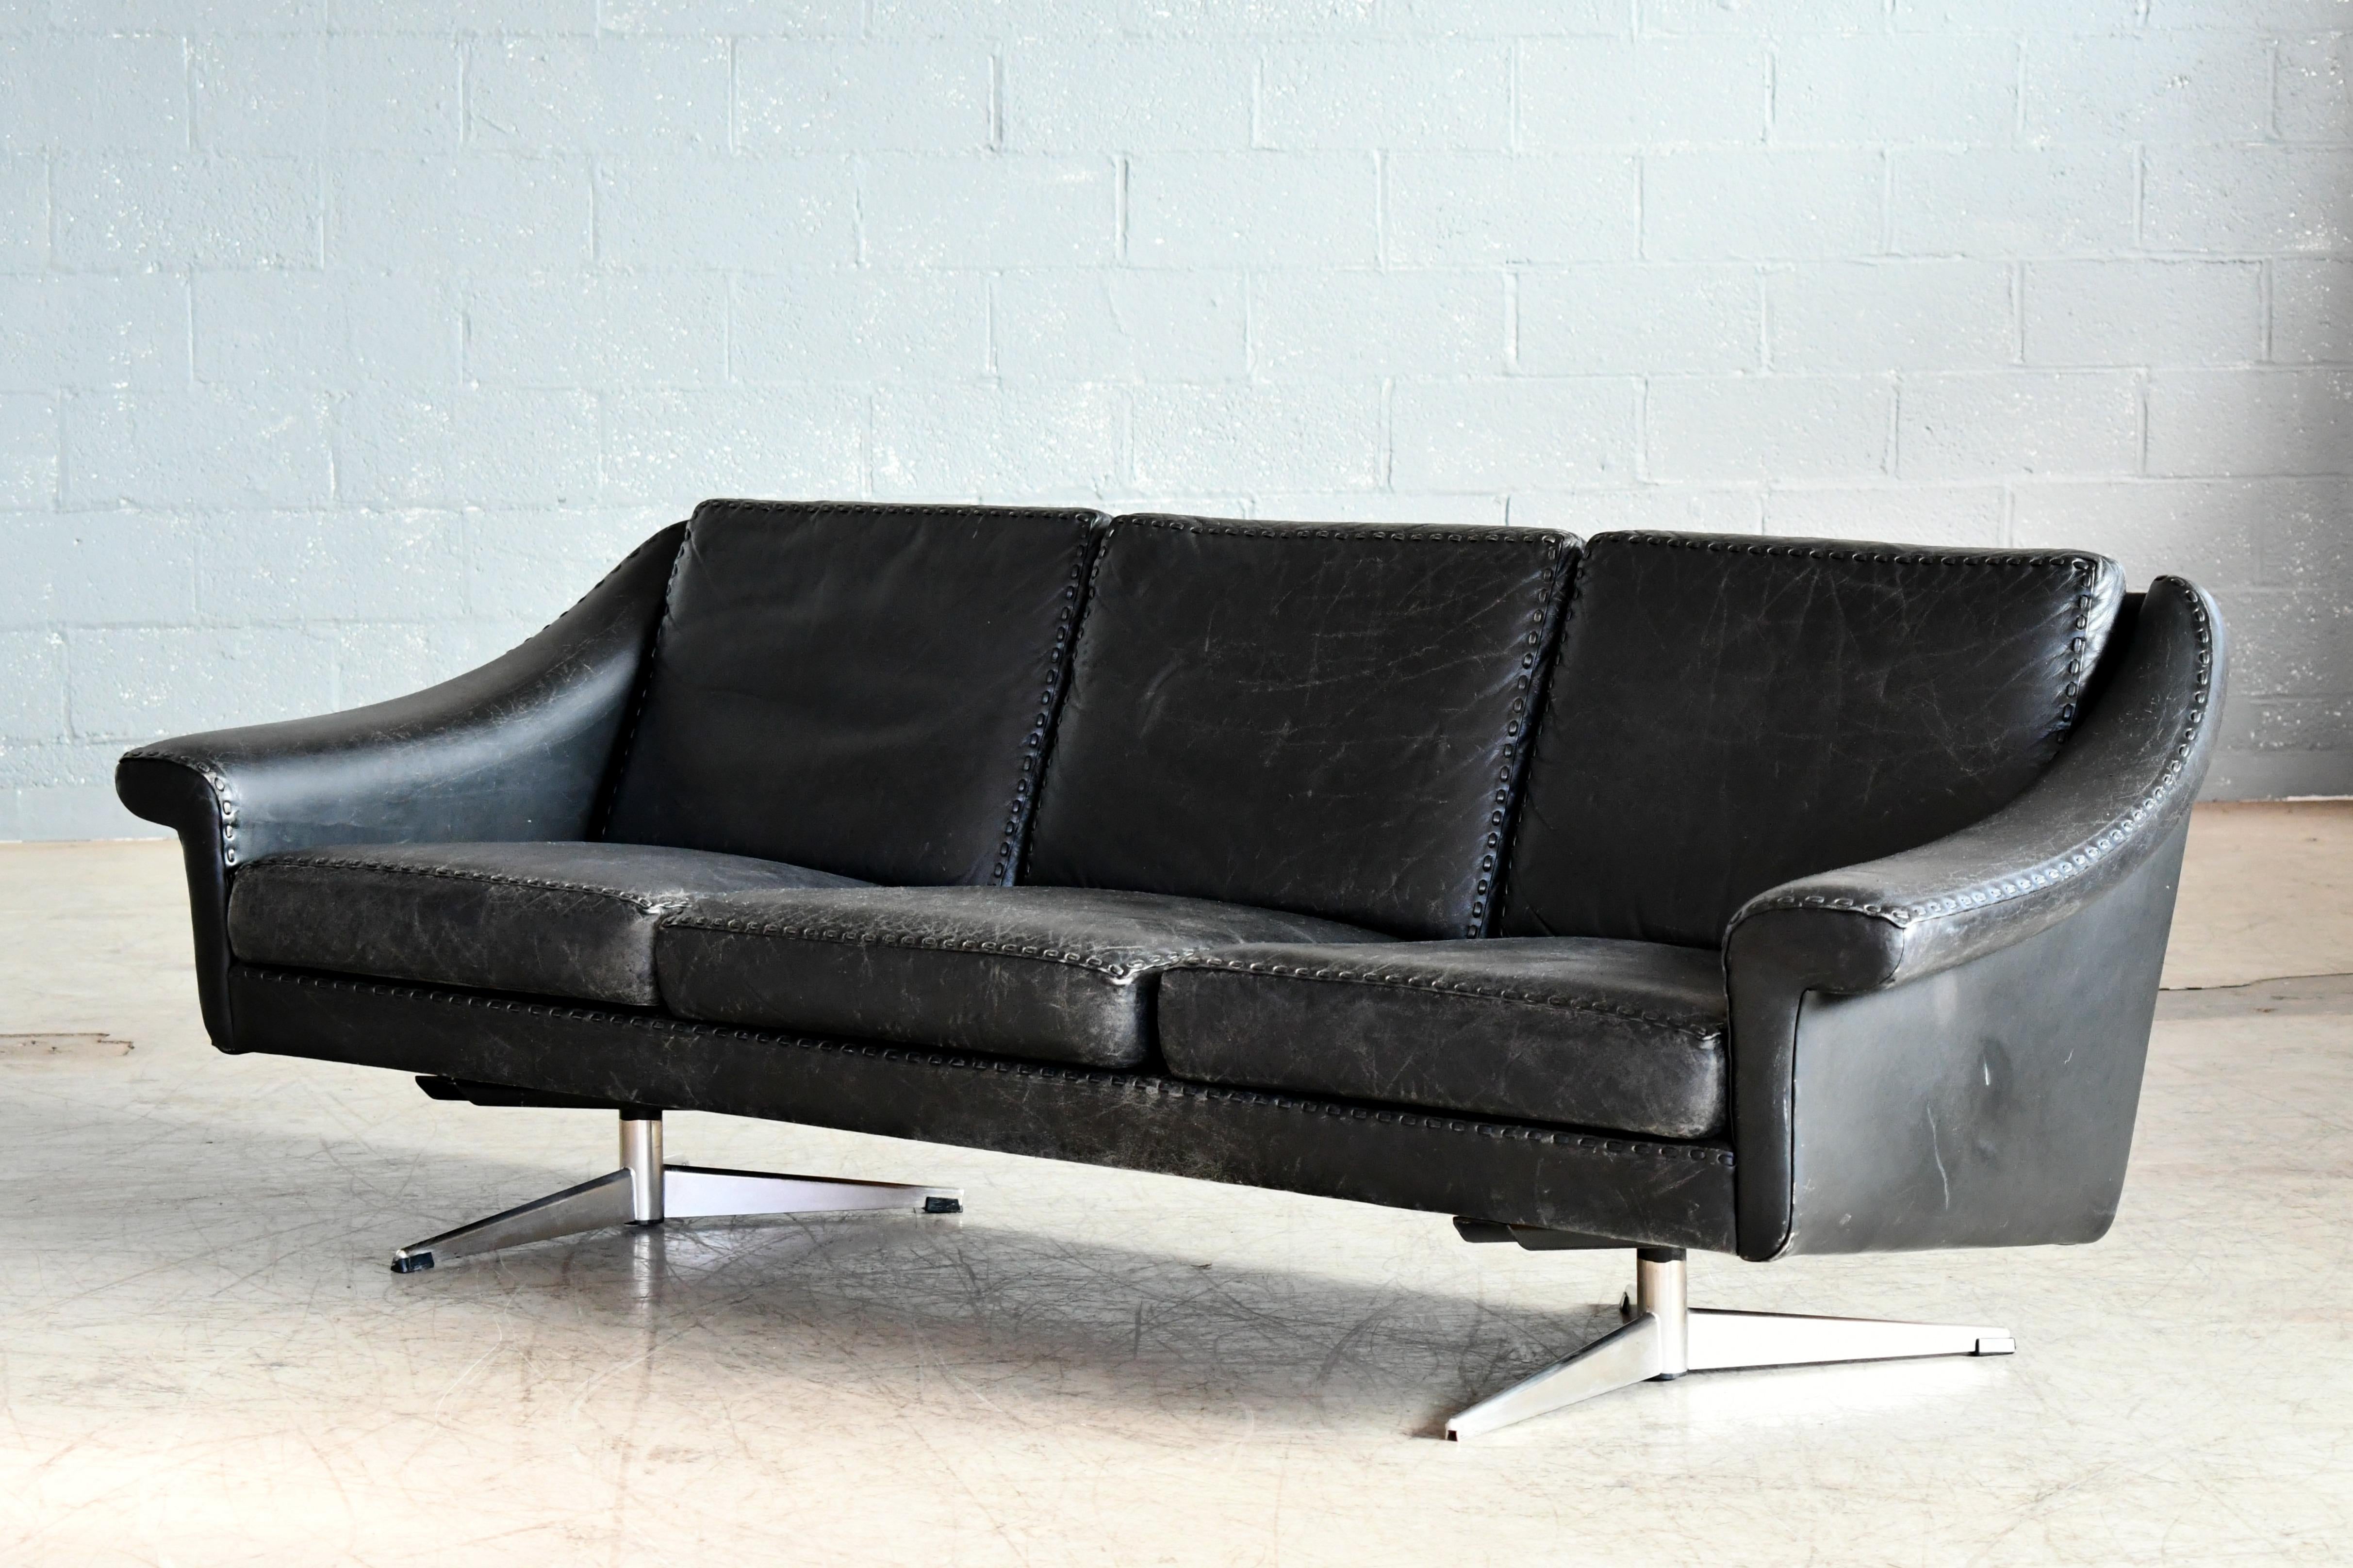 Elegant three seat leather sofa model Matador from 1966 designed by Aage Christiansen in the mid-1960s and produced by Erhardsen & Andersen, Denmark. Upholstered in supple black ox hide leather on a steel l base. Super elegant highest quality with